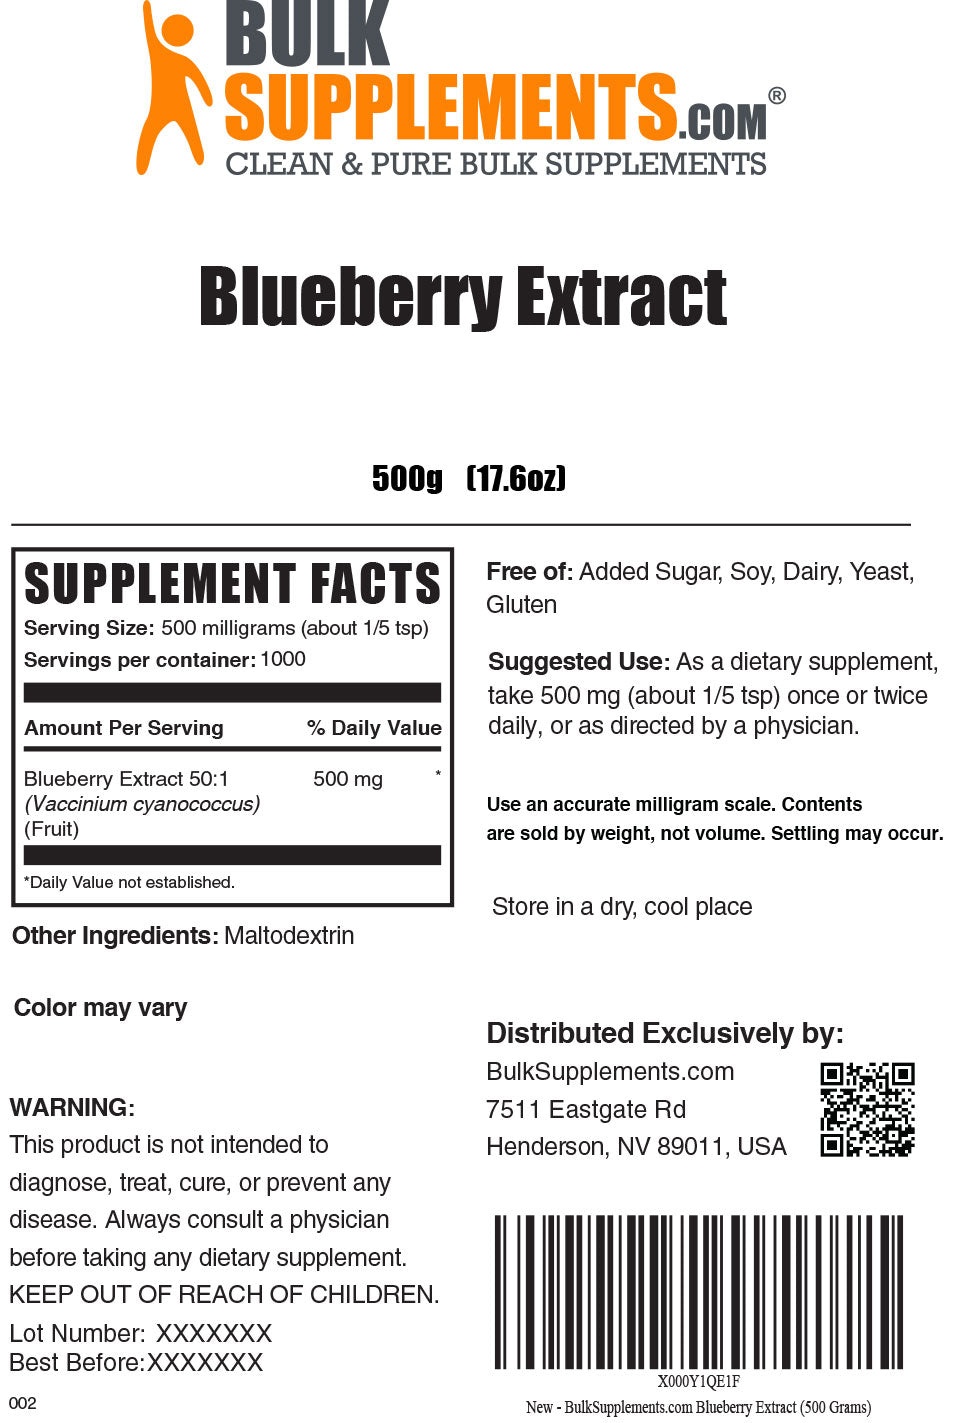 500g of Blueberry Extract Supplement Facts